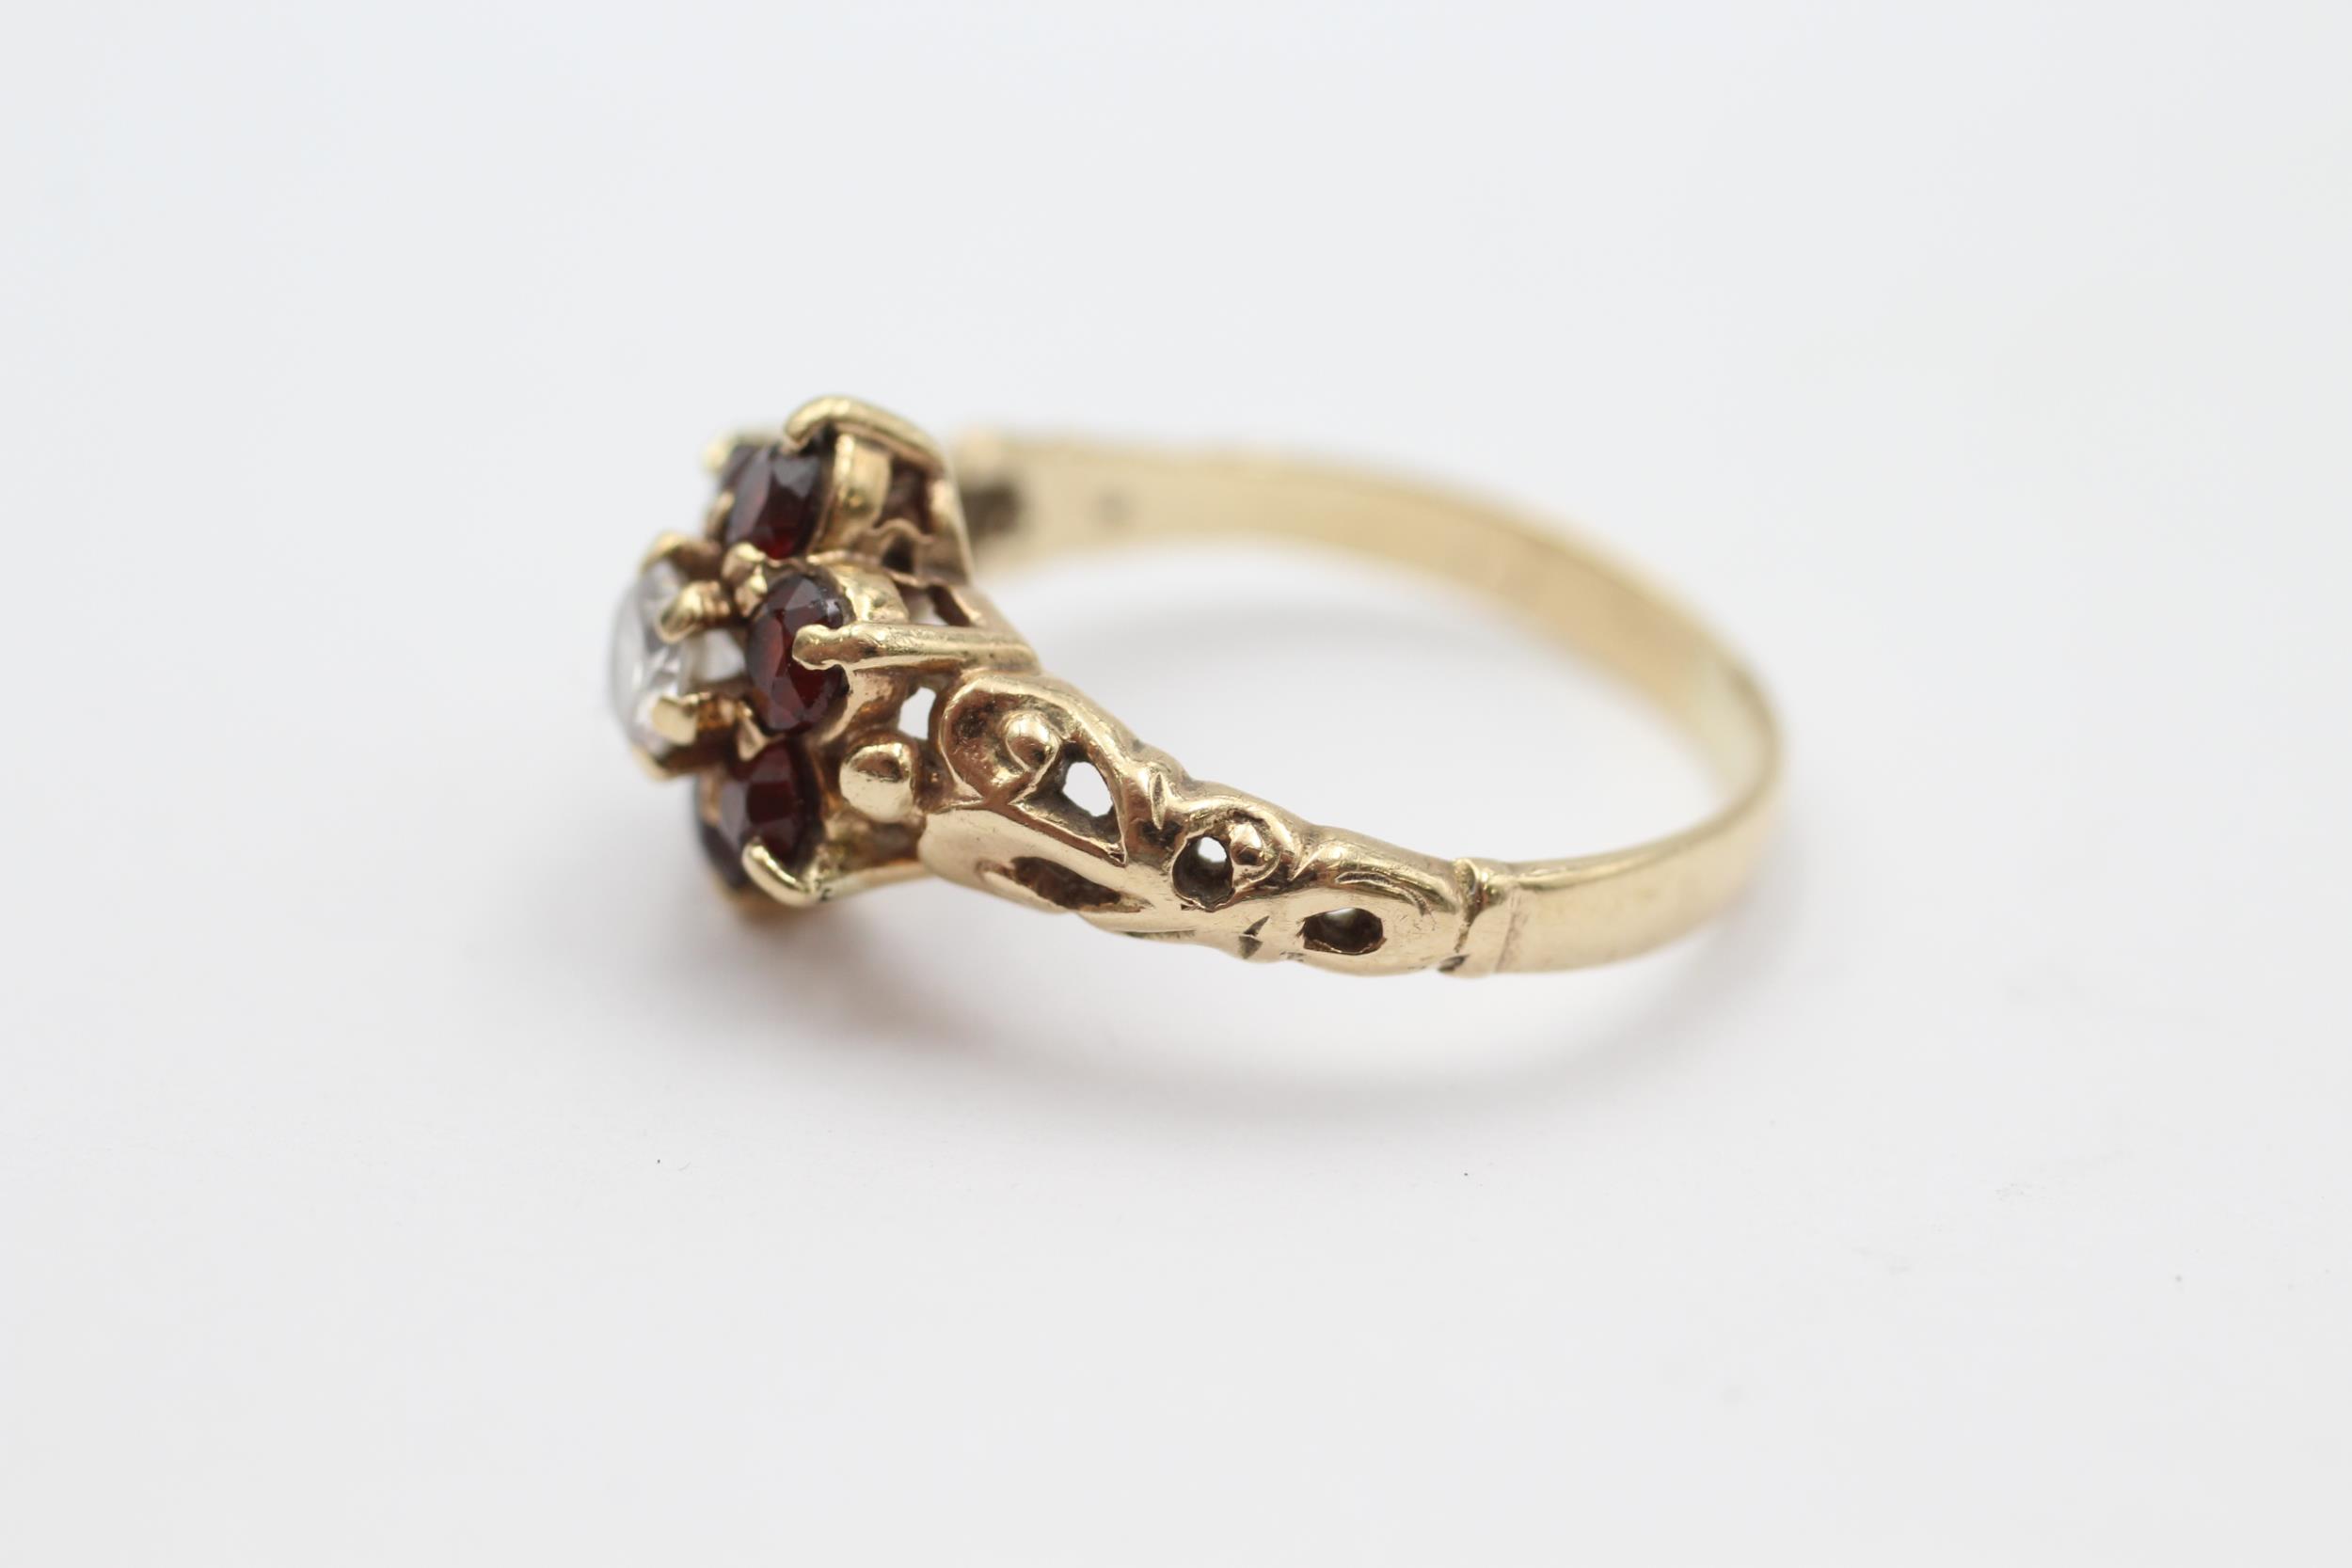 9ct gold 1970's garnet & cubic zirconia cluster ring Size N - 2.6 g - Image 4 of 5